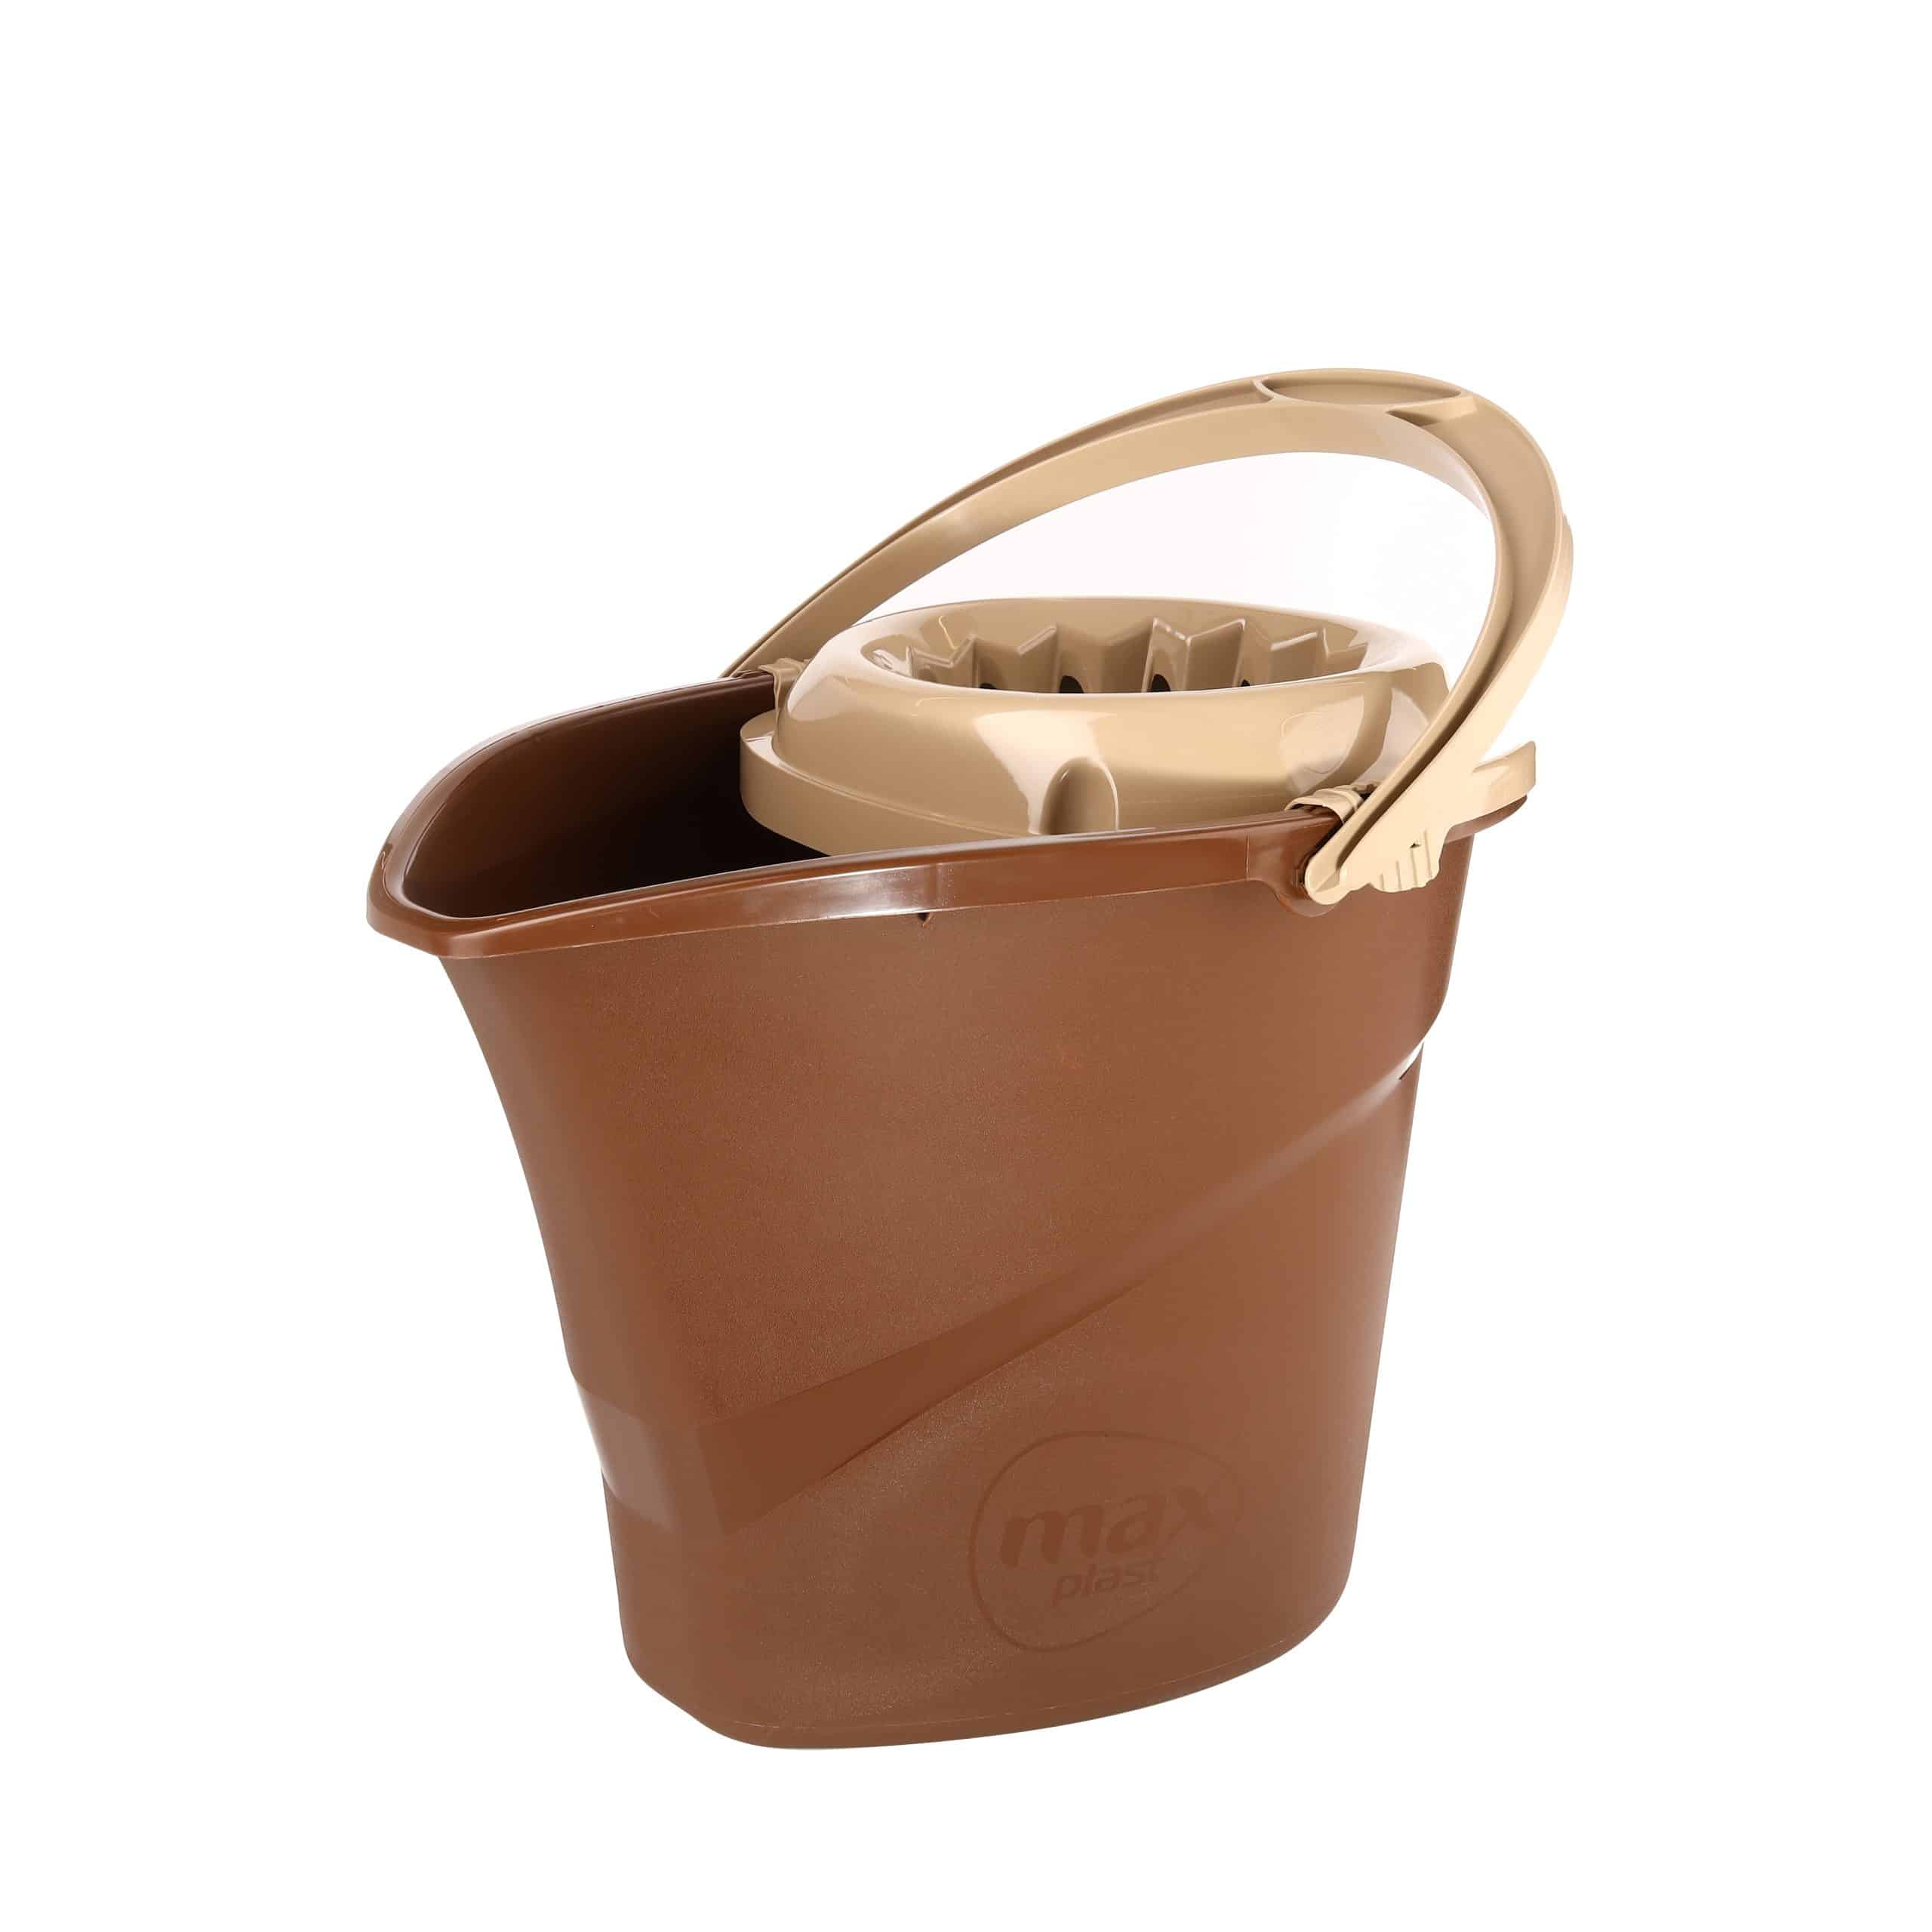 Oval Mopping Bucket - Max Plast